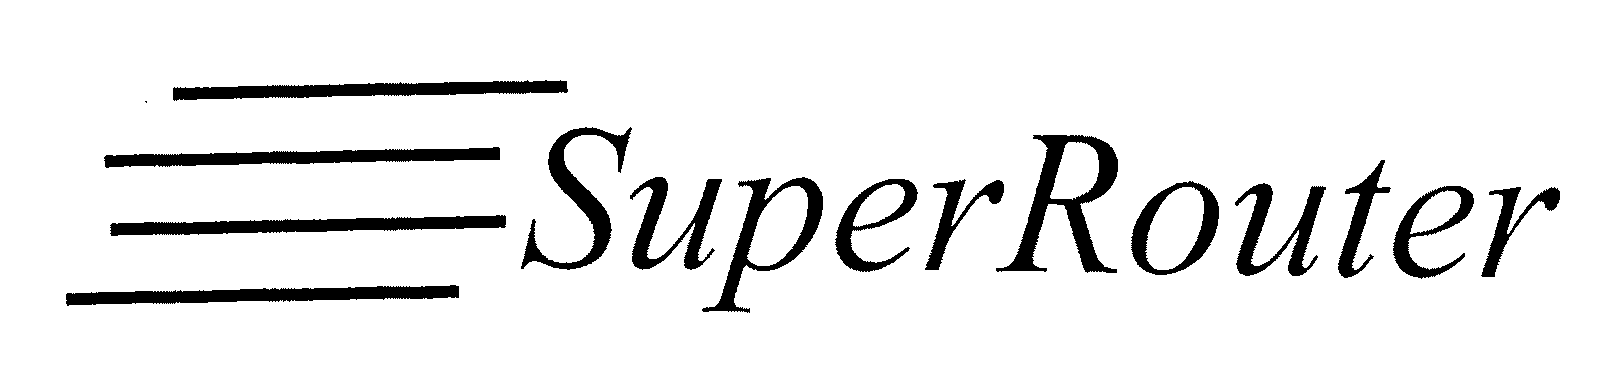  SUPERROUTER